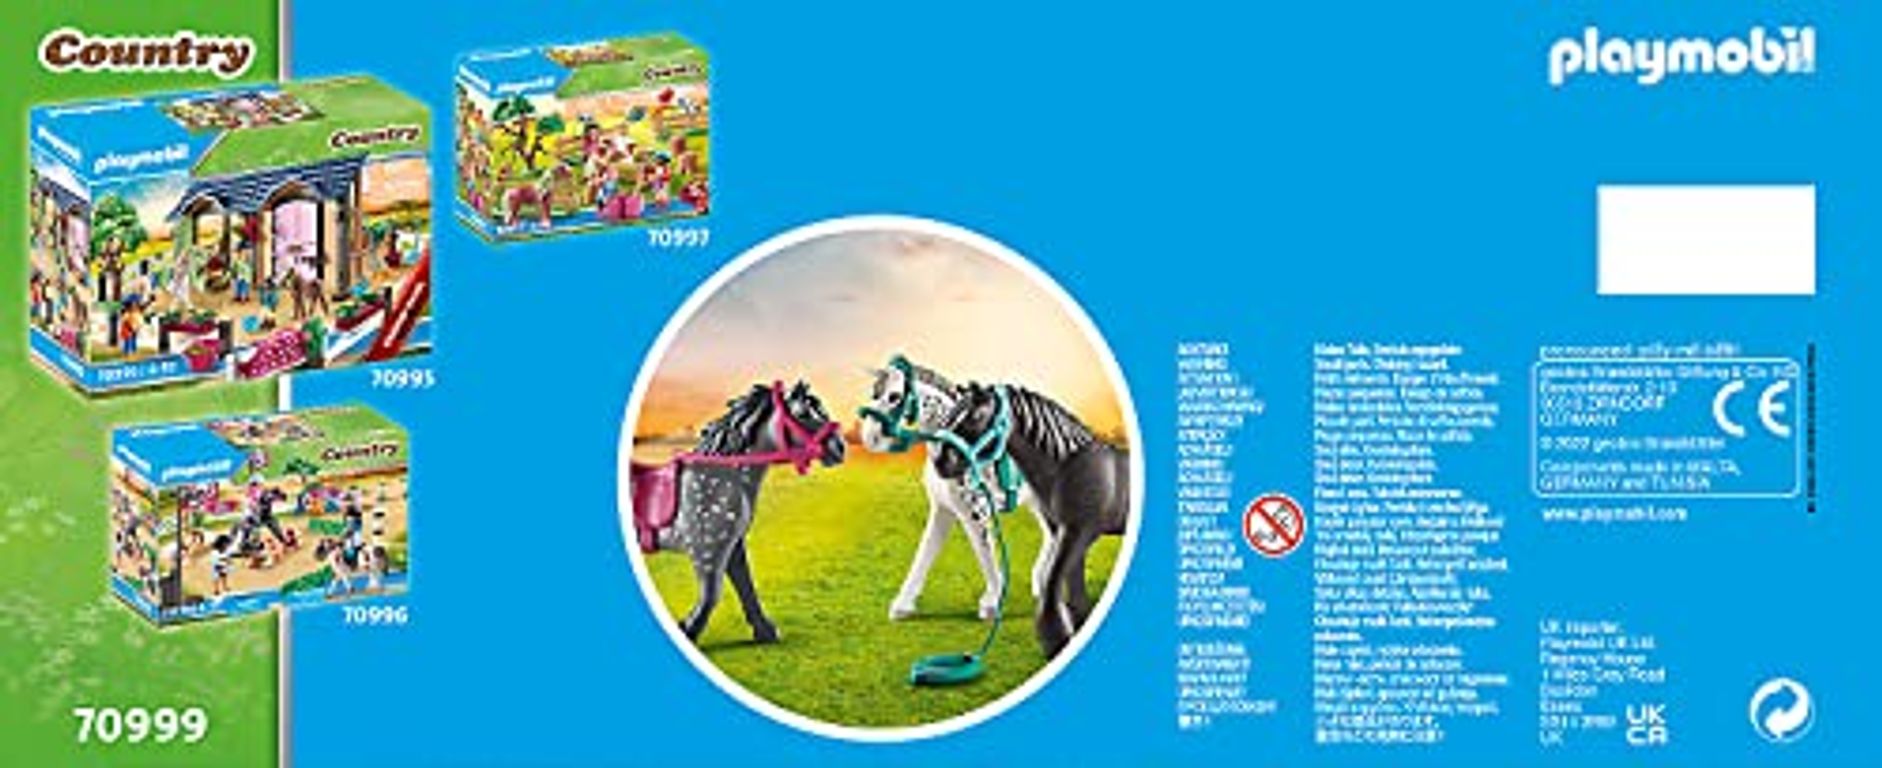 Playmobil® Country Horse Trio back of the box